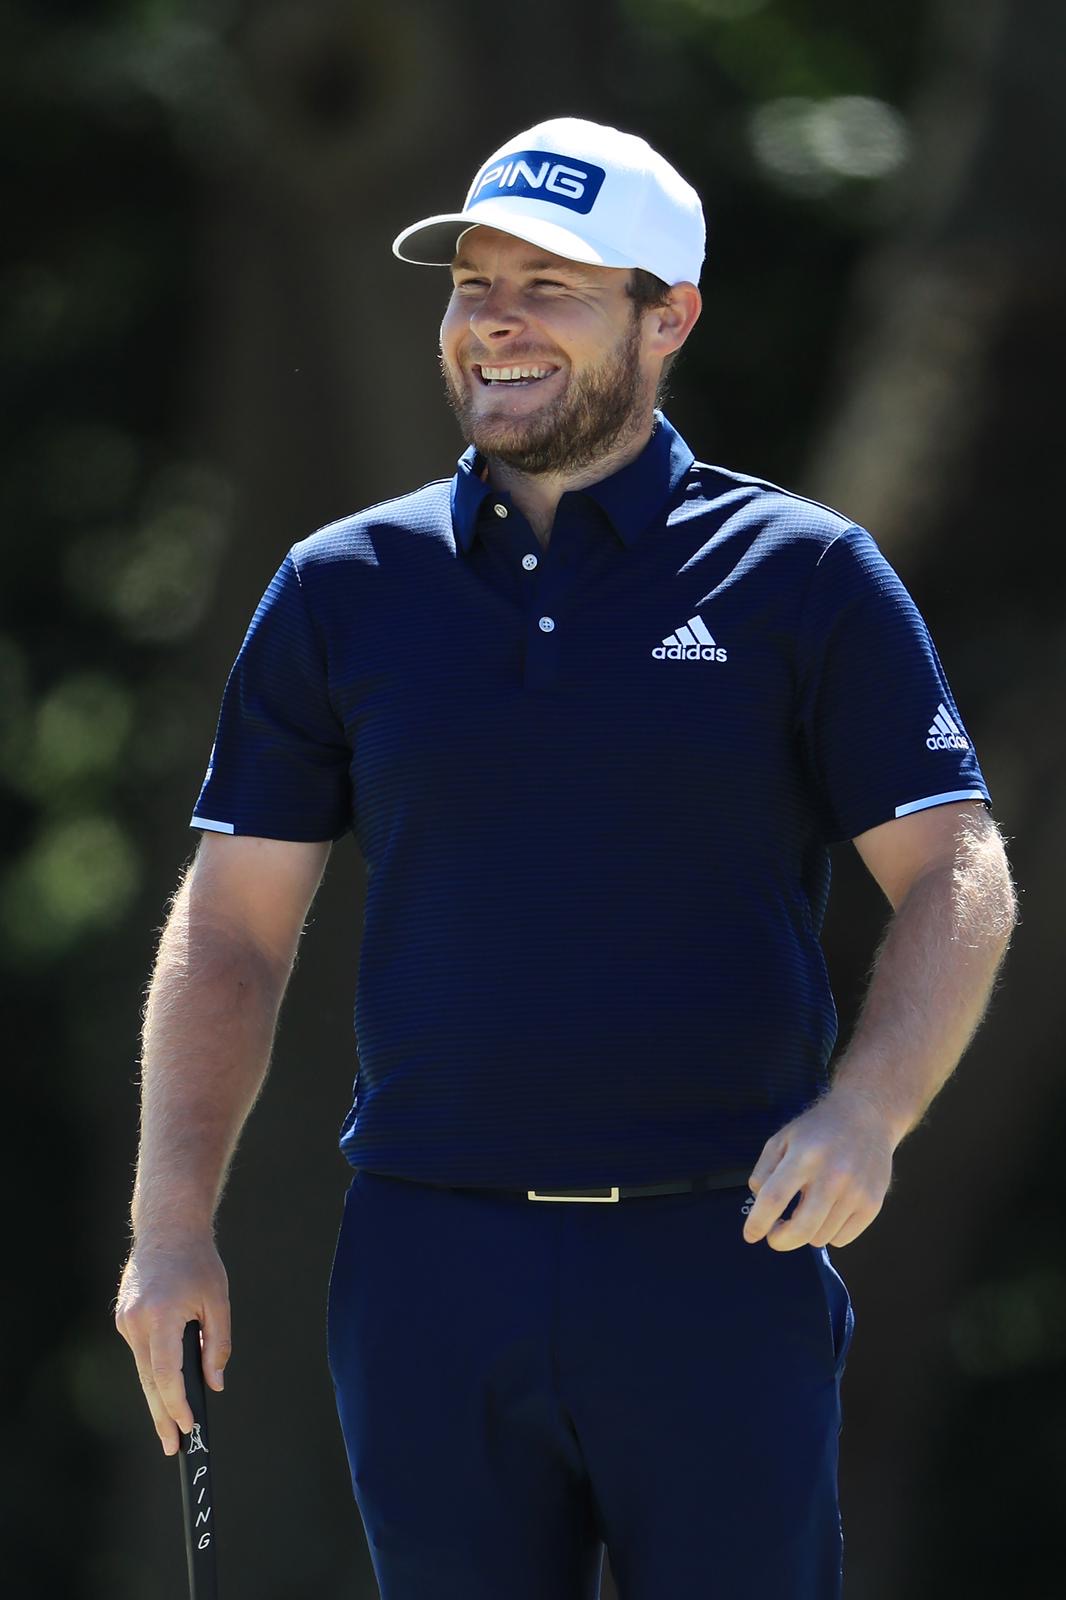 EXCLUSIVE: Tyrrell Hatton on PGA Tour win, Ryder Cup and lockdown life